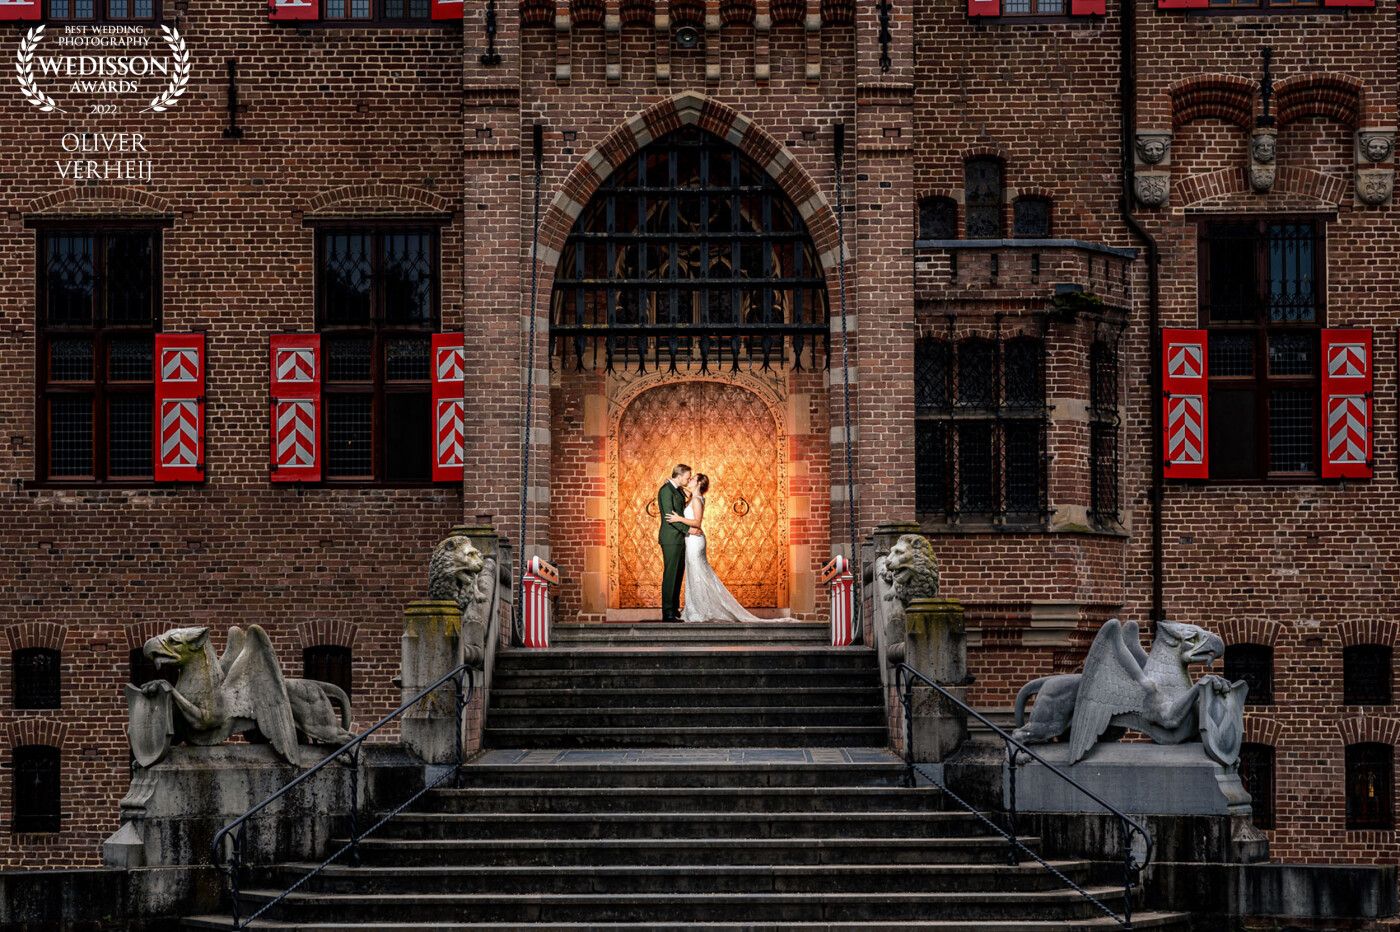 Castle Huis Bergh in the Netherlands is a fantastic venue for a romantic wedding. I love making photos there.